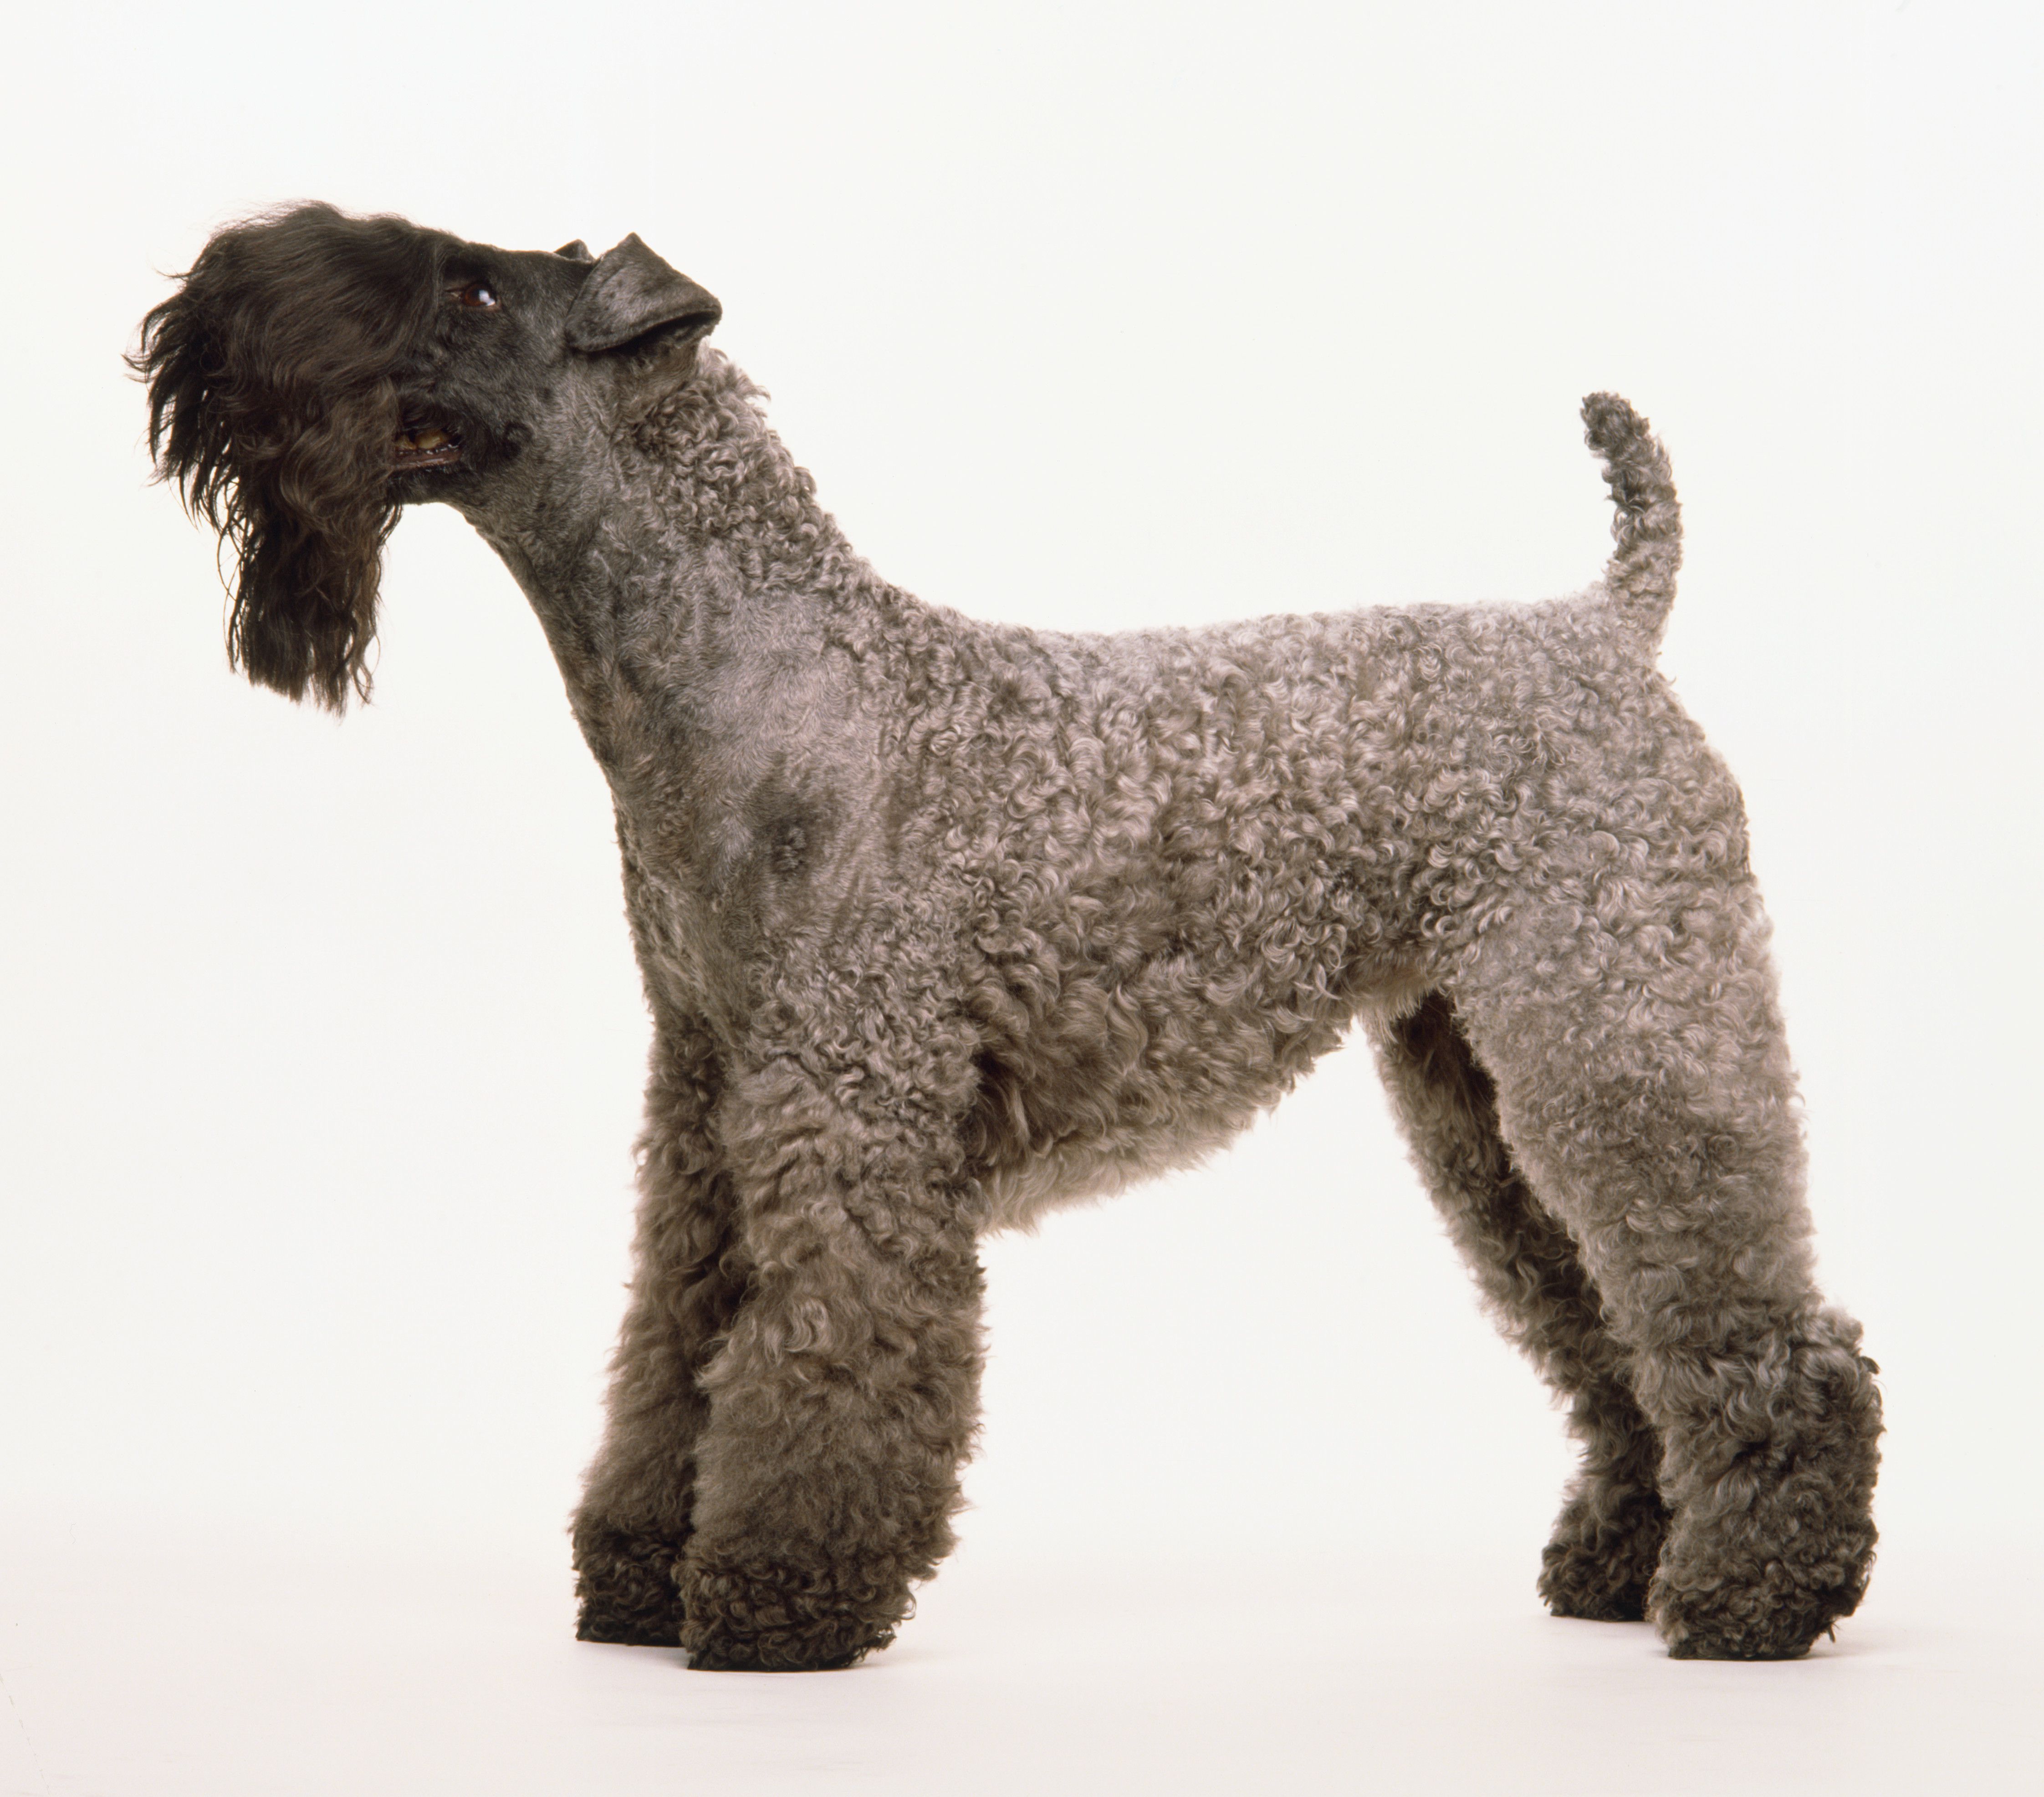 A Kerry blue terrier with a grey curly coat, a short tail, and a thick black long beard, on all fours, side-on